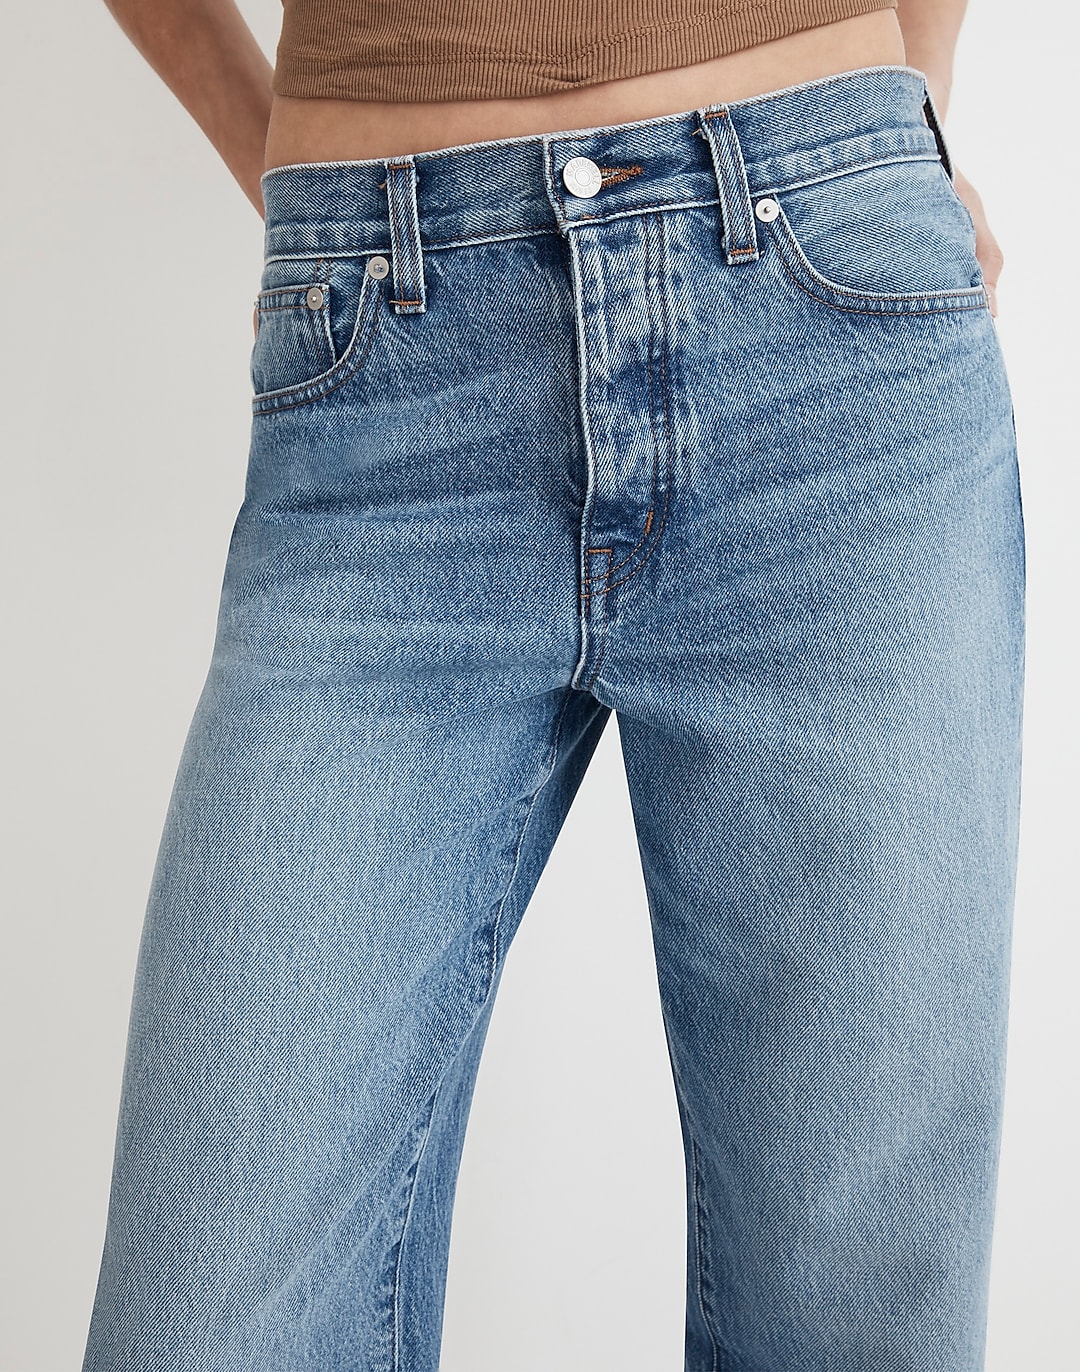 Low-Slung Straight Jeans in Seville Wash | Madewell